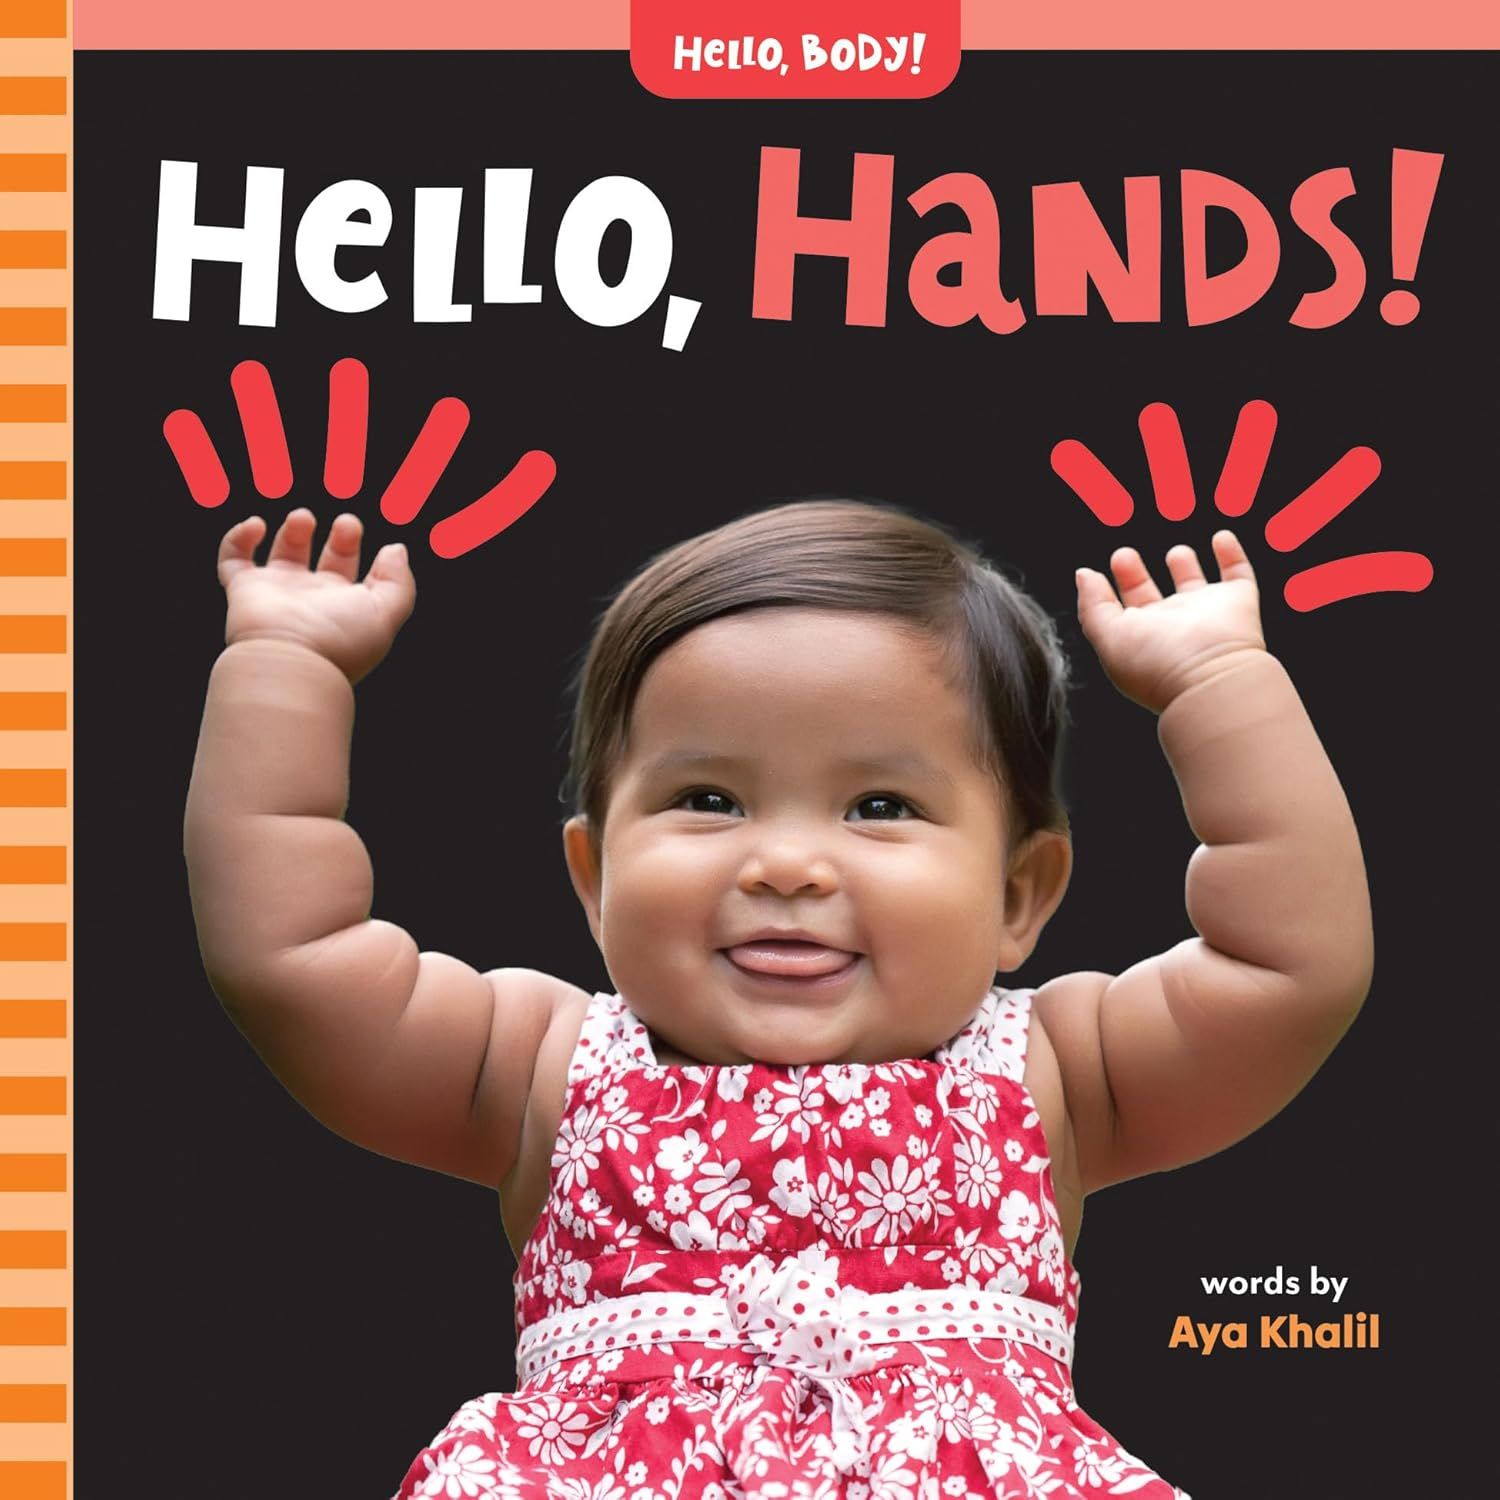 Cover of Hello, Hands! by Aya Khalil